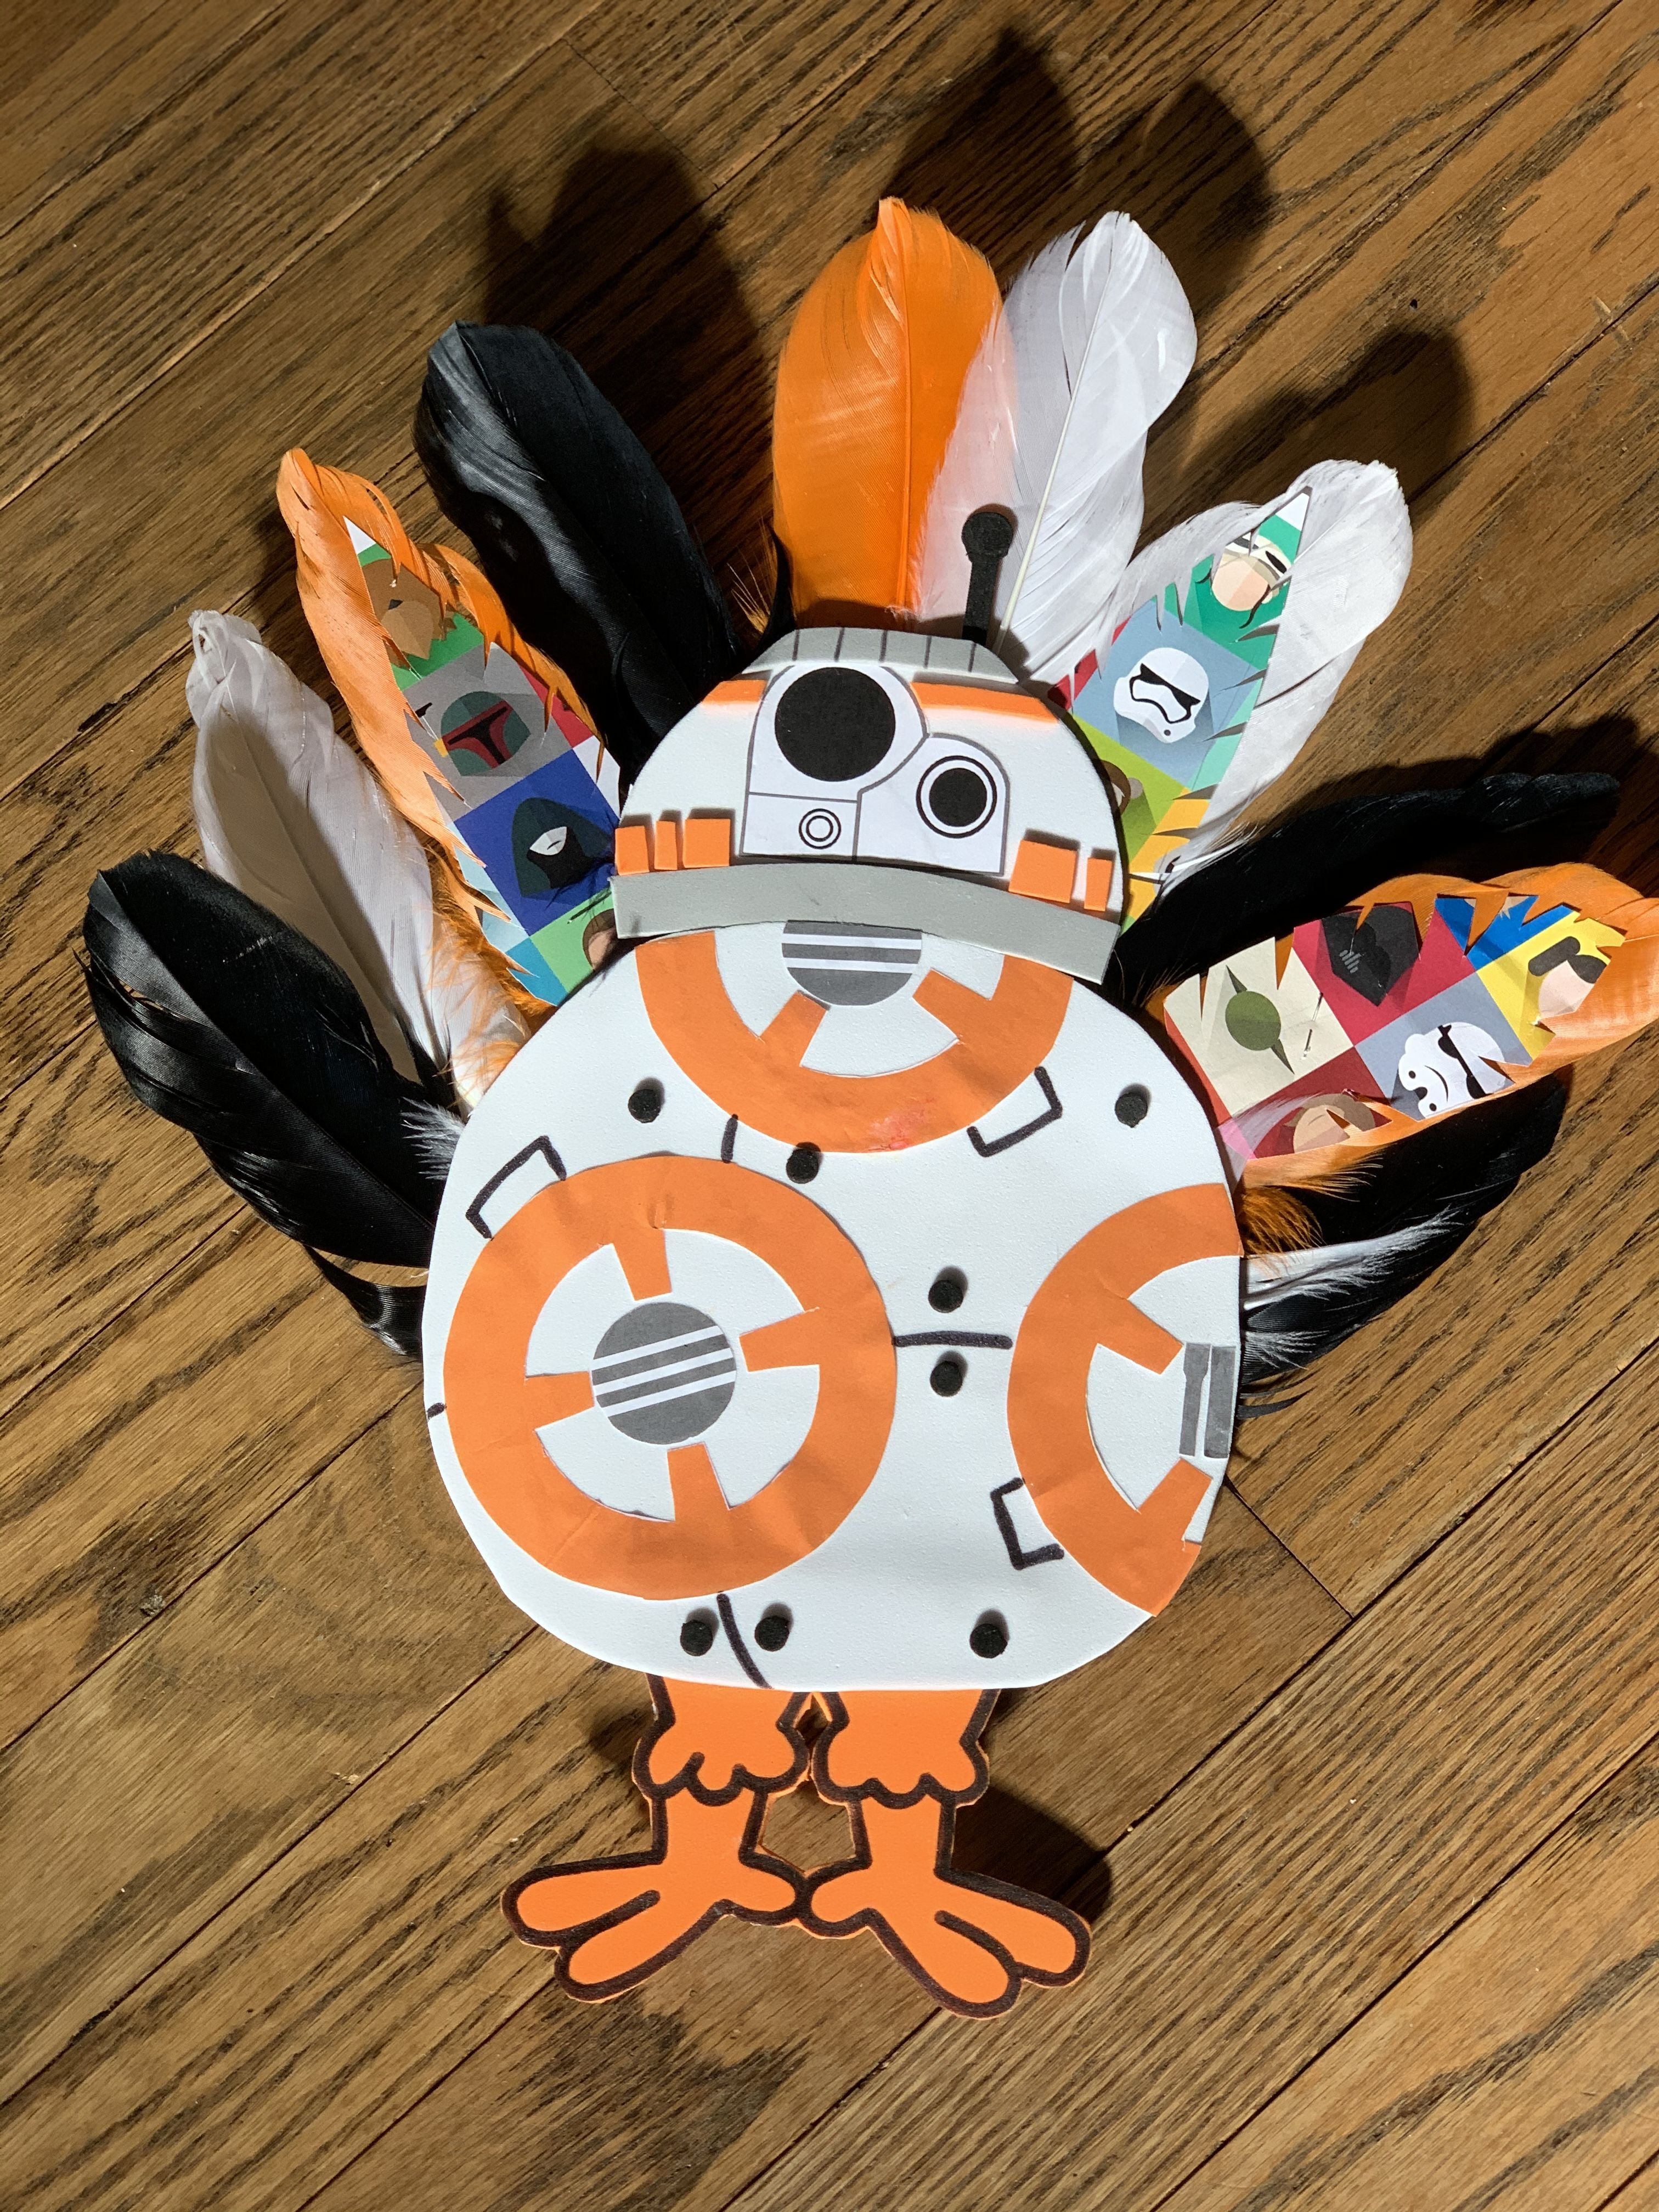 Turkey in Disguise - BB8 Star Wars -   18 disguise a turkey project printable template ideas